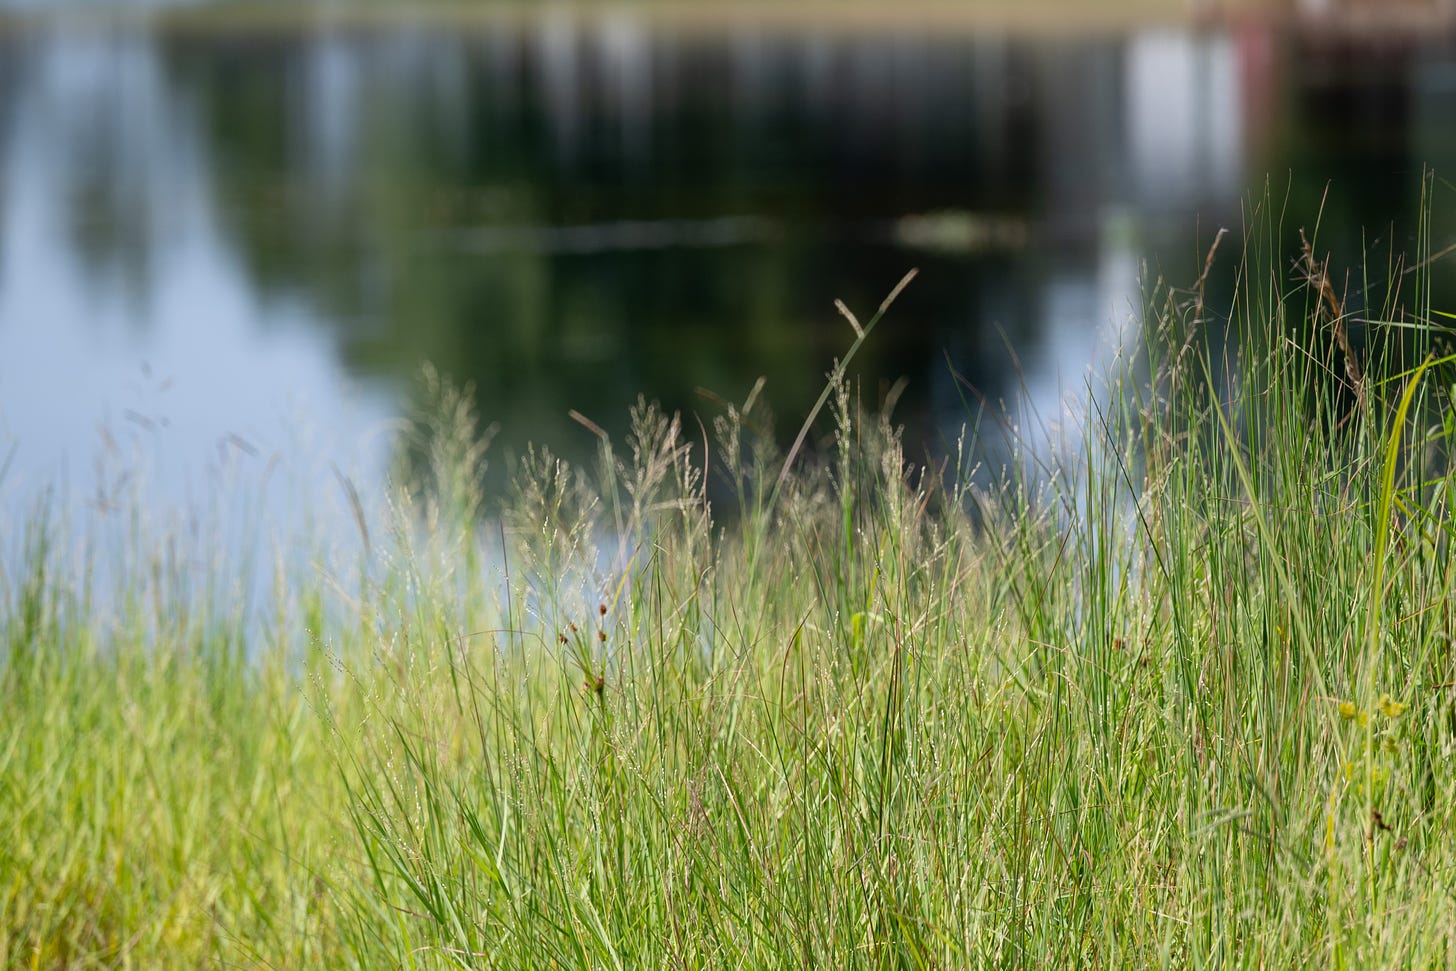 Lake grass with a refletion of the shore in the water behind the tall green grass